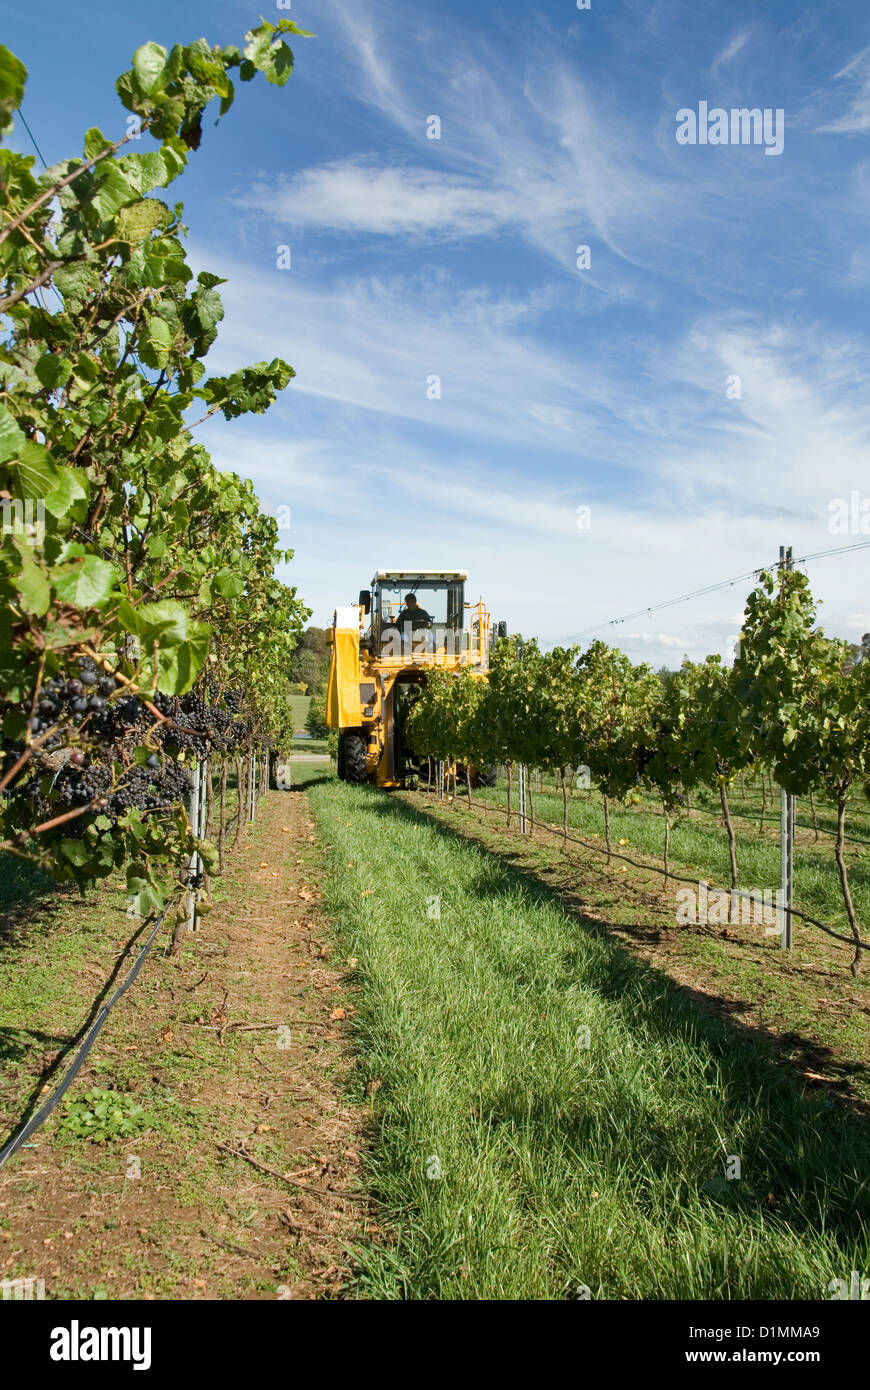 A grape harvester in a vineyard on the Southern Highlands of New South Wales, Australia Stock Photo